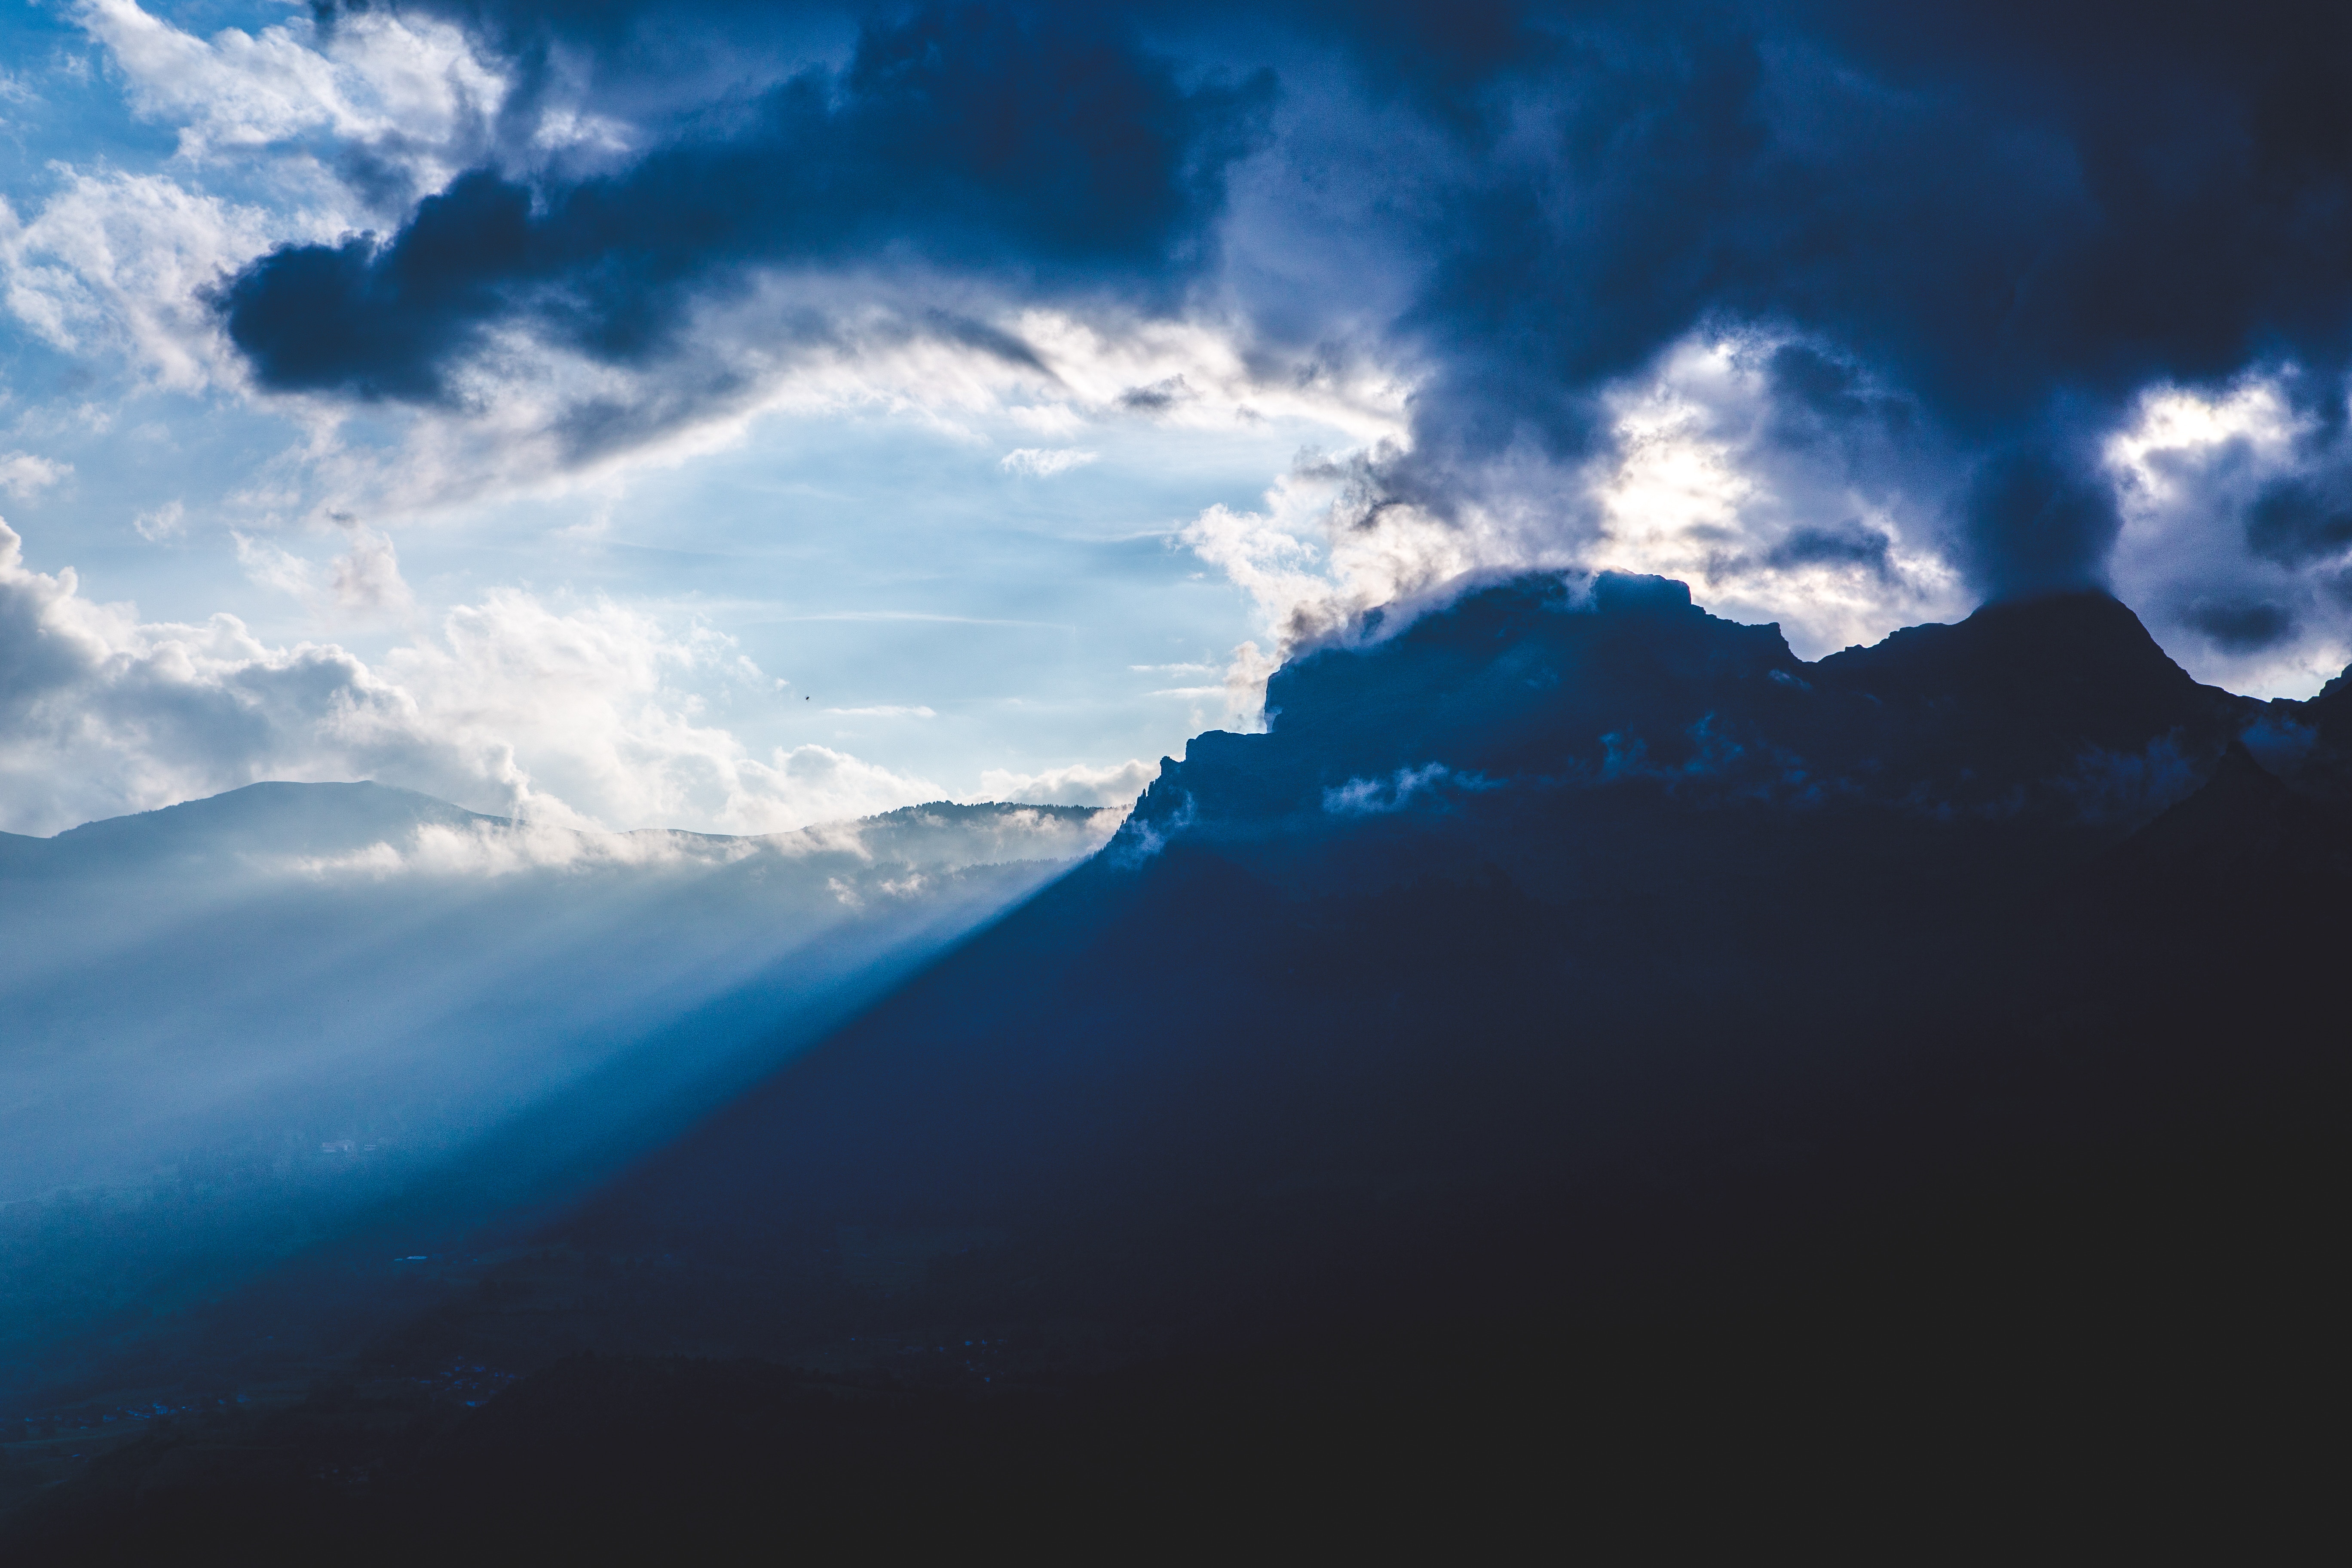 Windows Backgrounds clouds, nature, mountains, dark, beams, rays, fog, foot